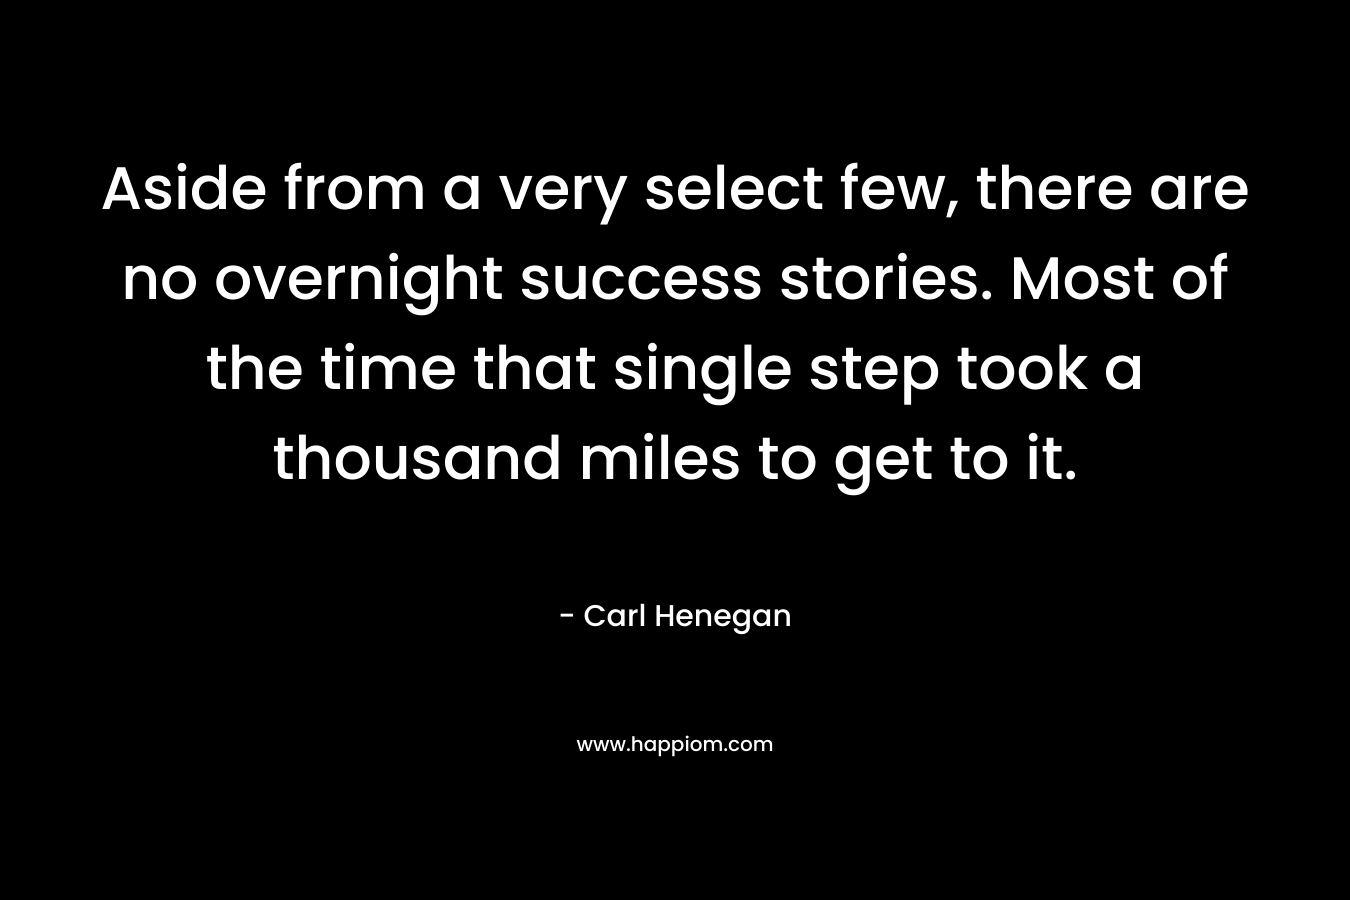 Aside from a very select few, there are no overnight success stories. Most of the time that single step took a thousand miles to get to it.